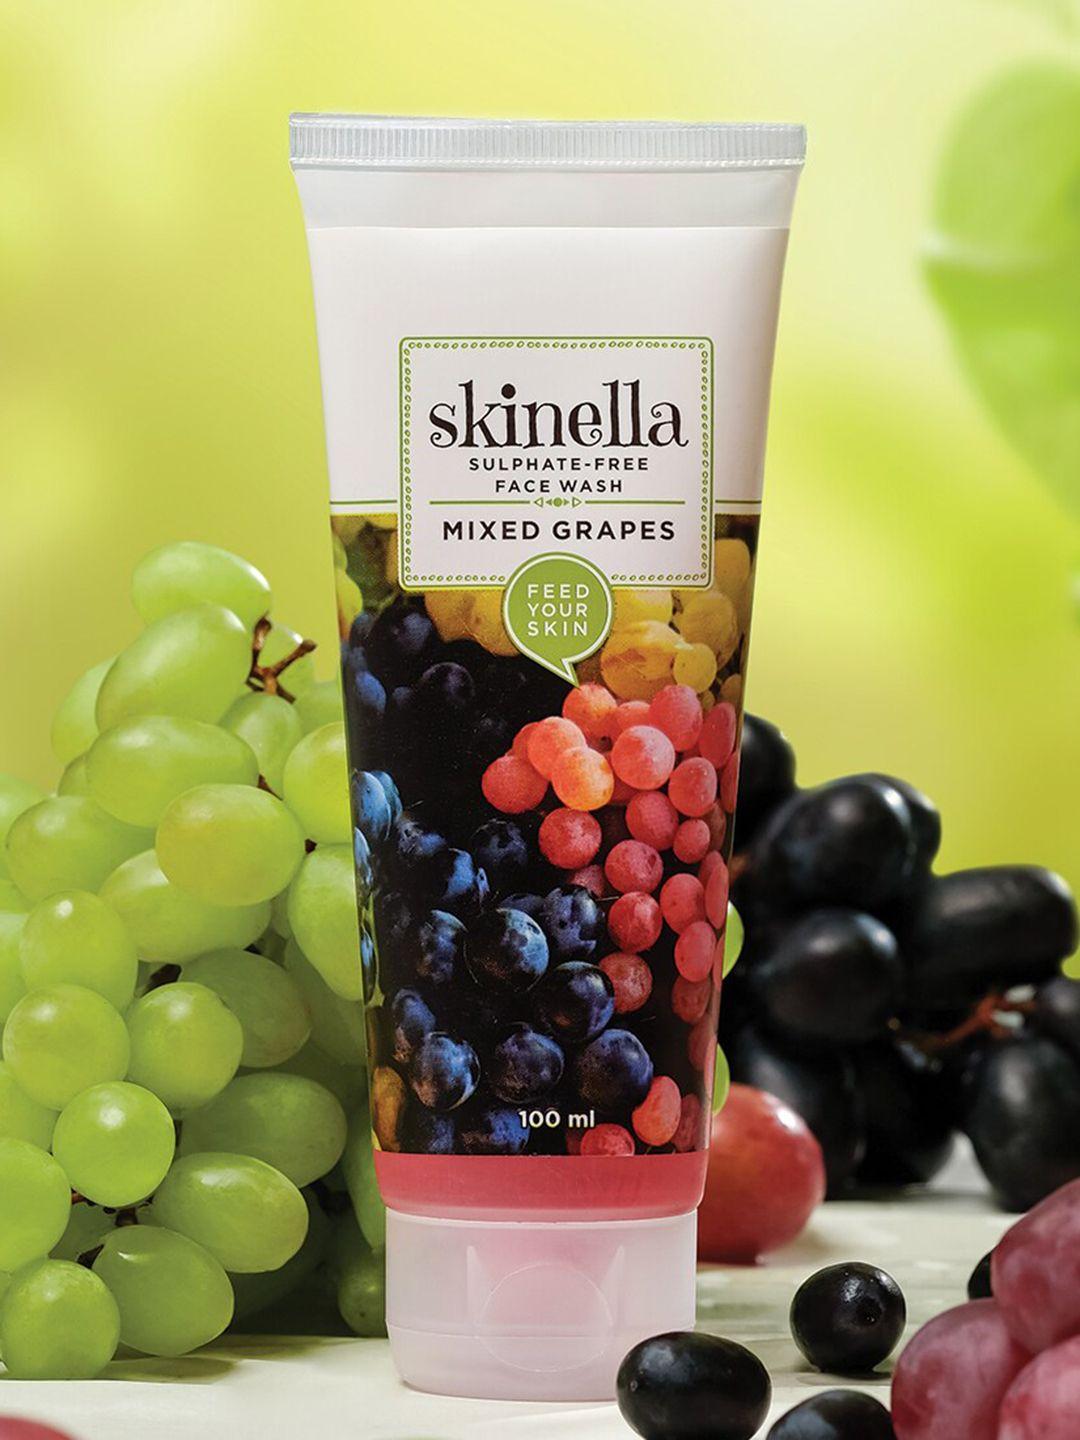 skinella sulphate free face wash with mixed grapes - 100ml